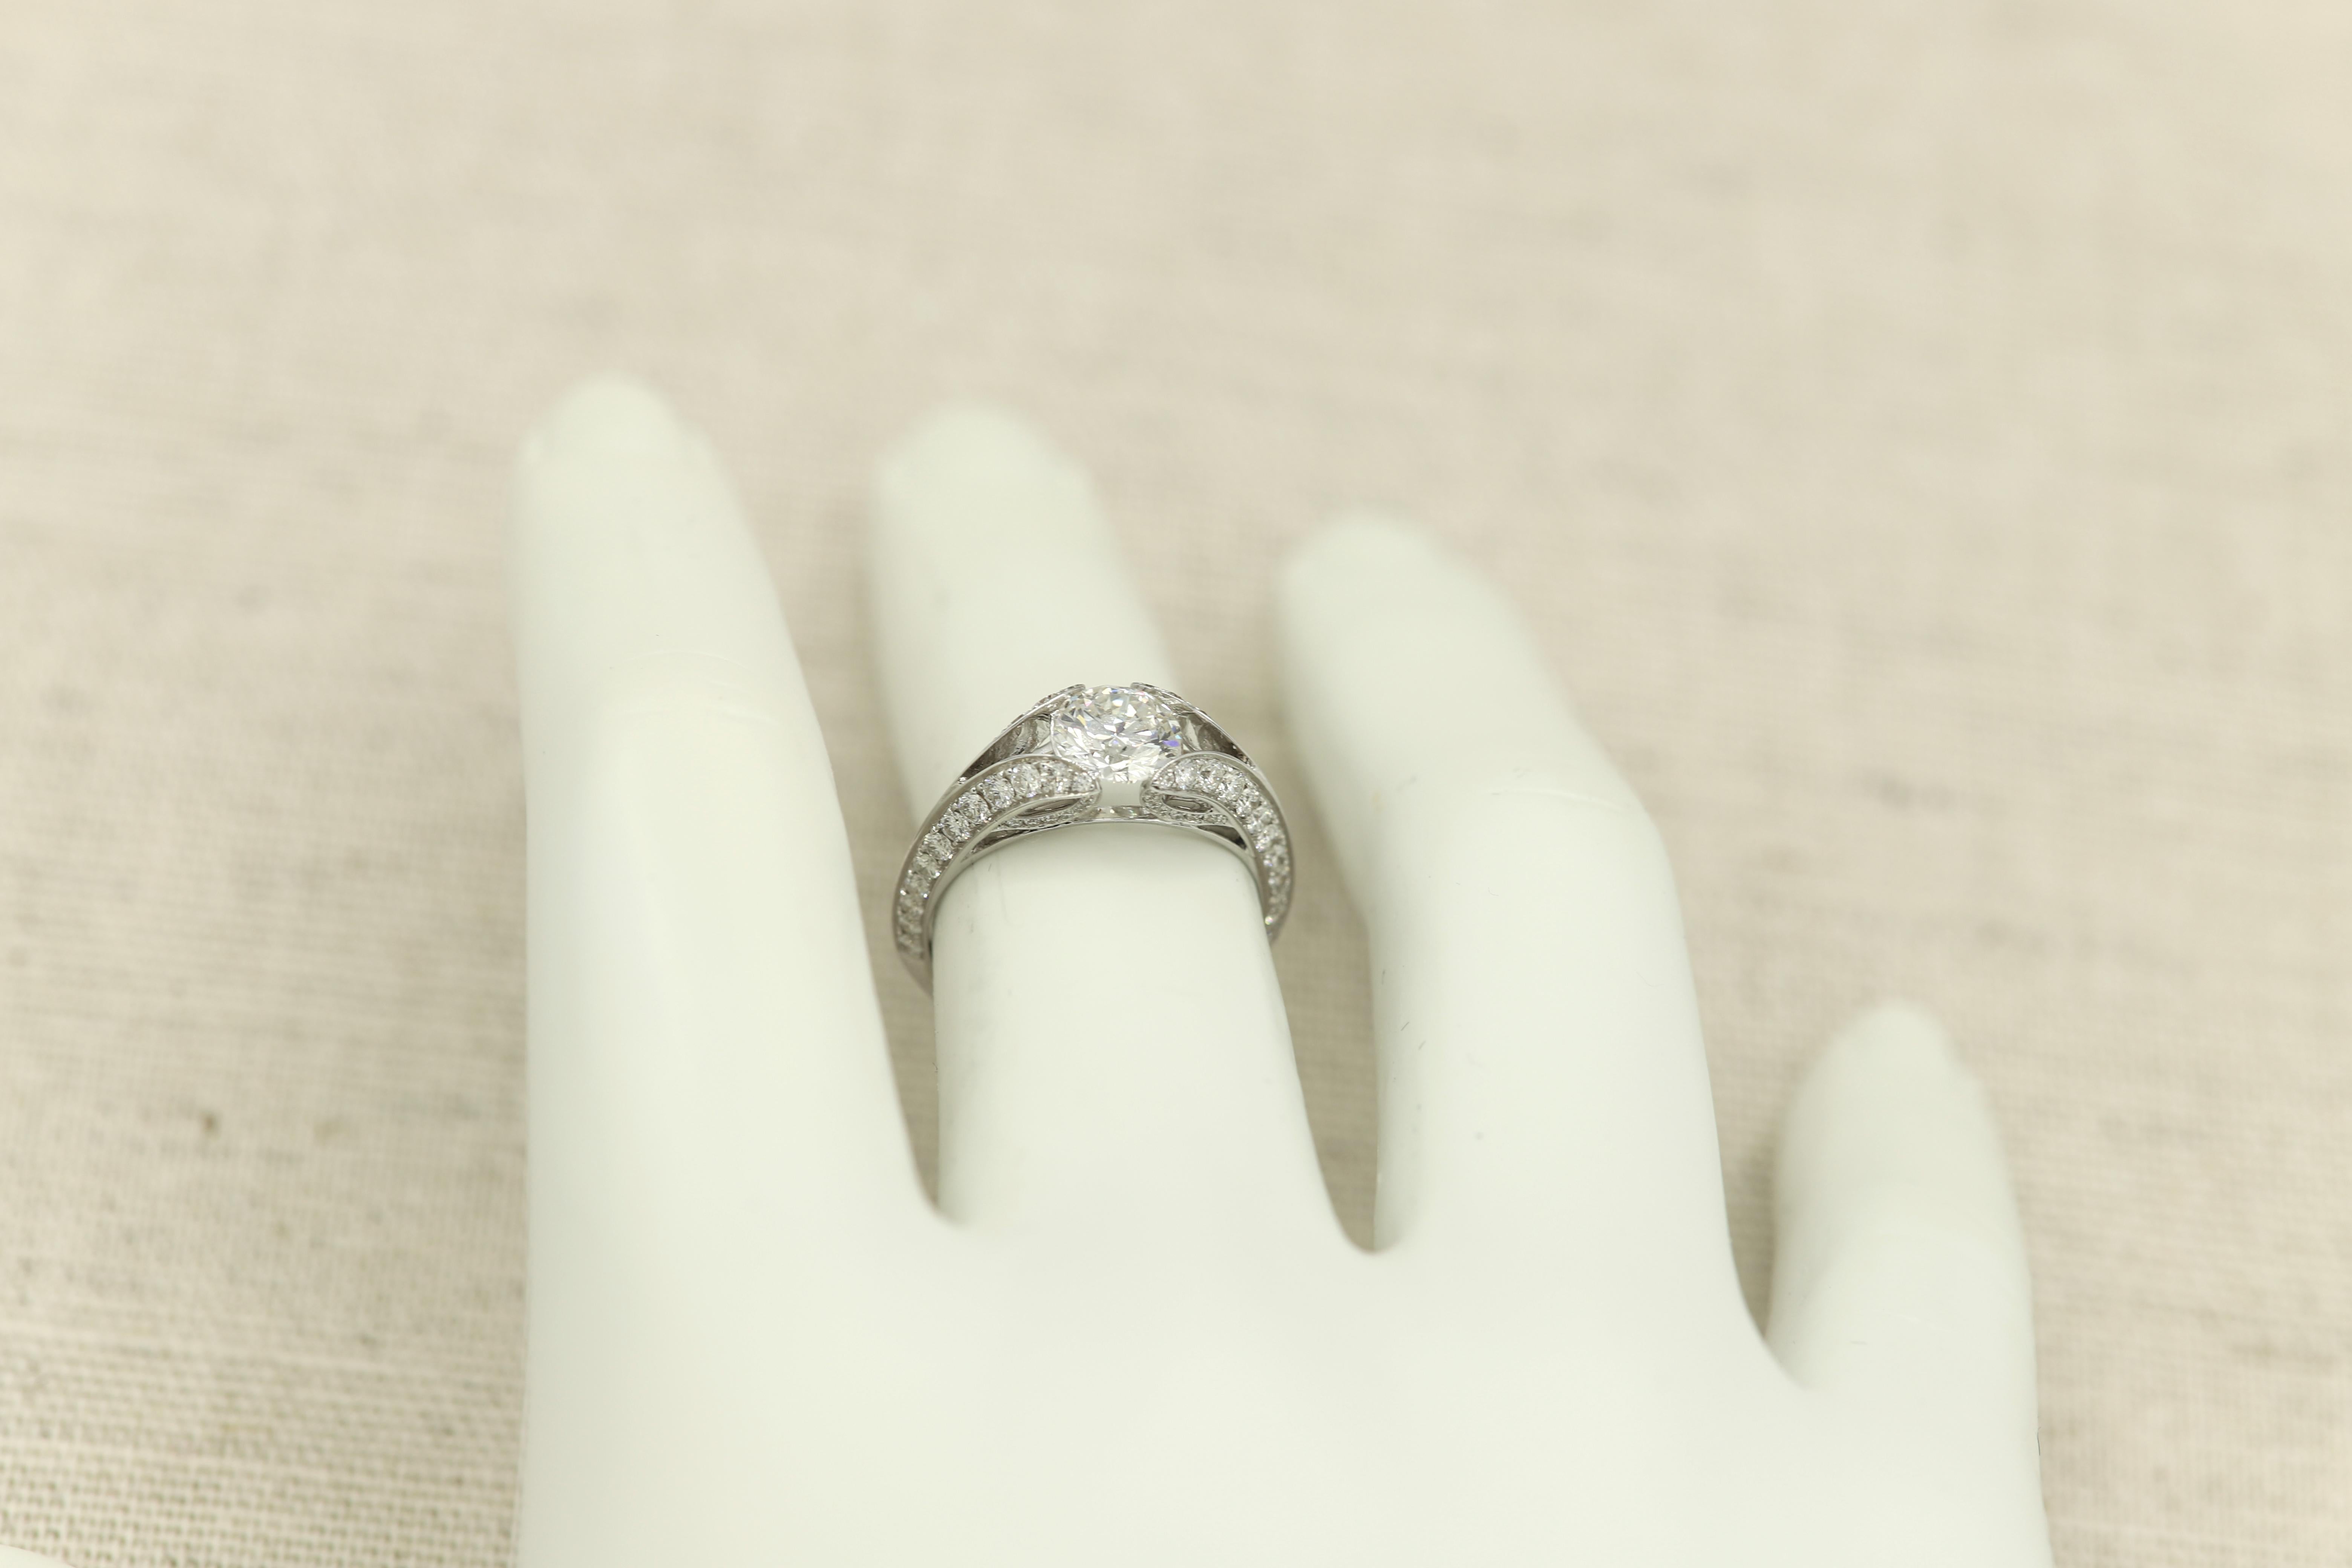 Embedded Diamond in Design Ring 1.04 Carat GIA Certificate 18 Karat White Gold In New Condition For Sale In Brooklyn, NY